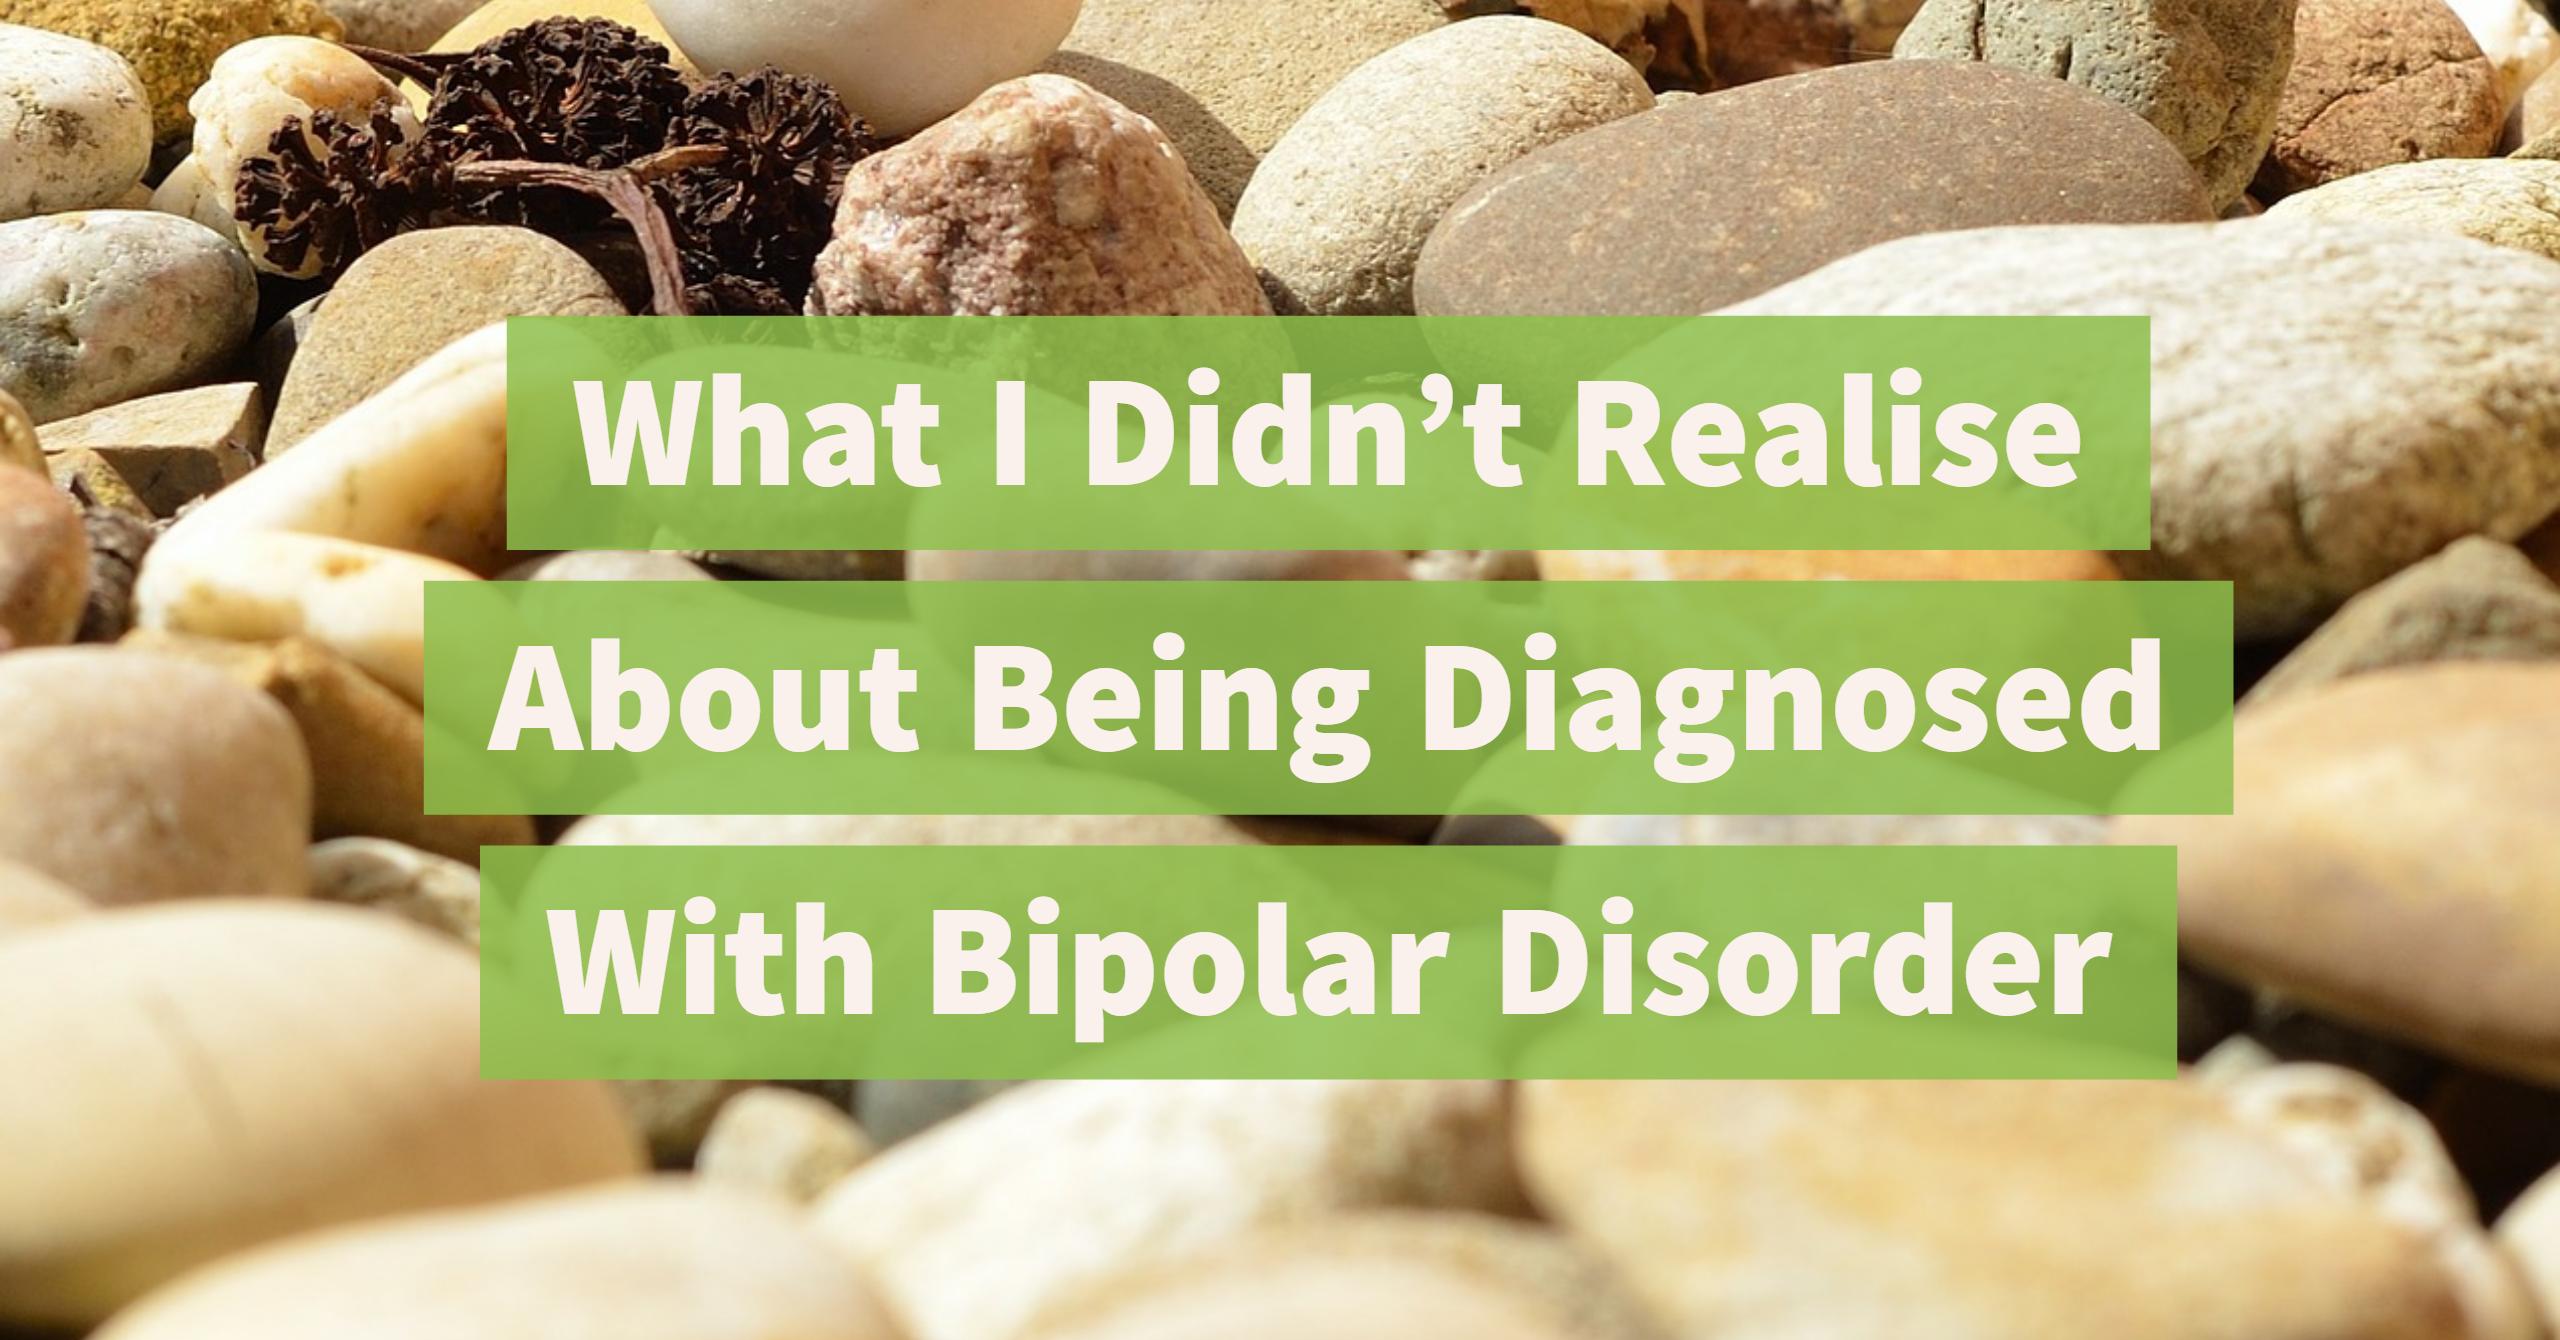 What I Didn’t Realise About Being Diagnosed With Bipolar Disorder